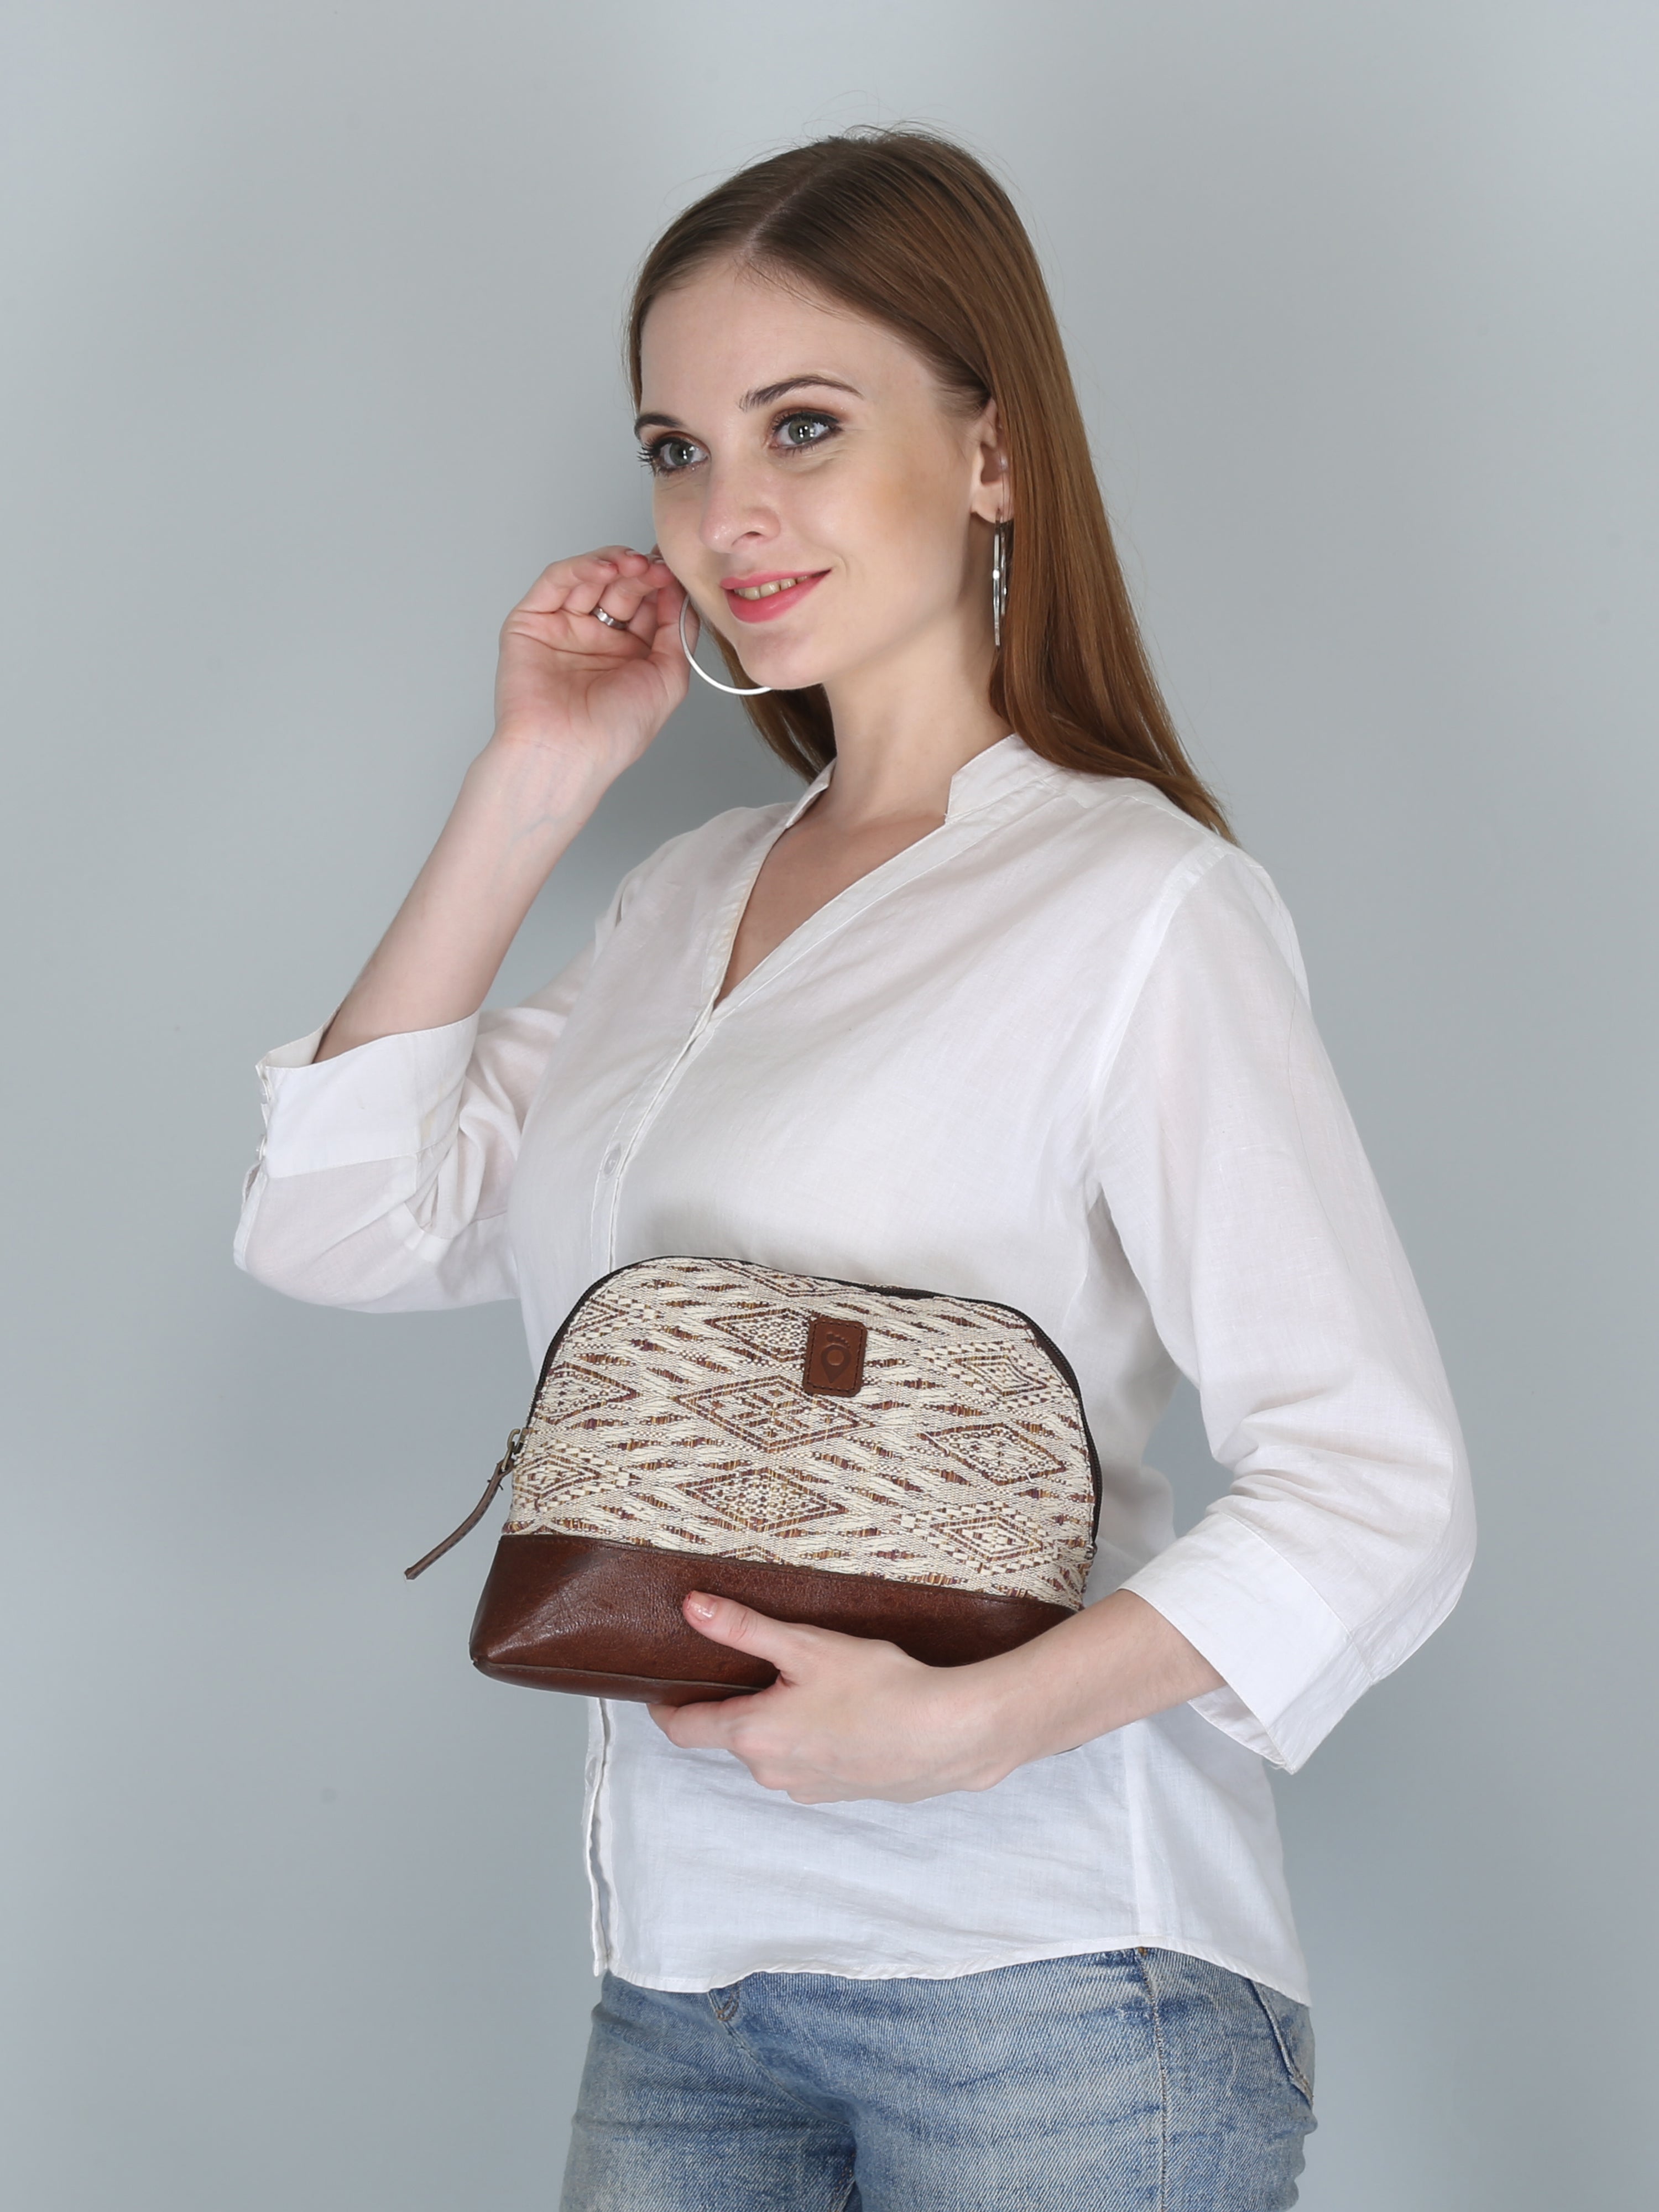 Woven Patterned Clutch | Brown and Cream